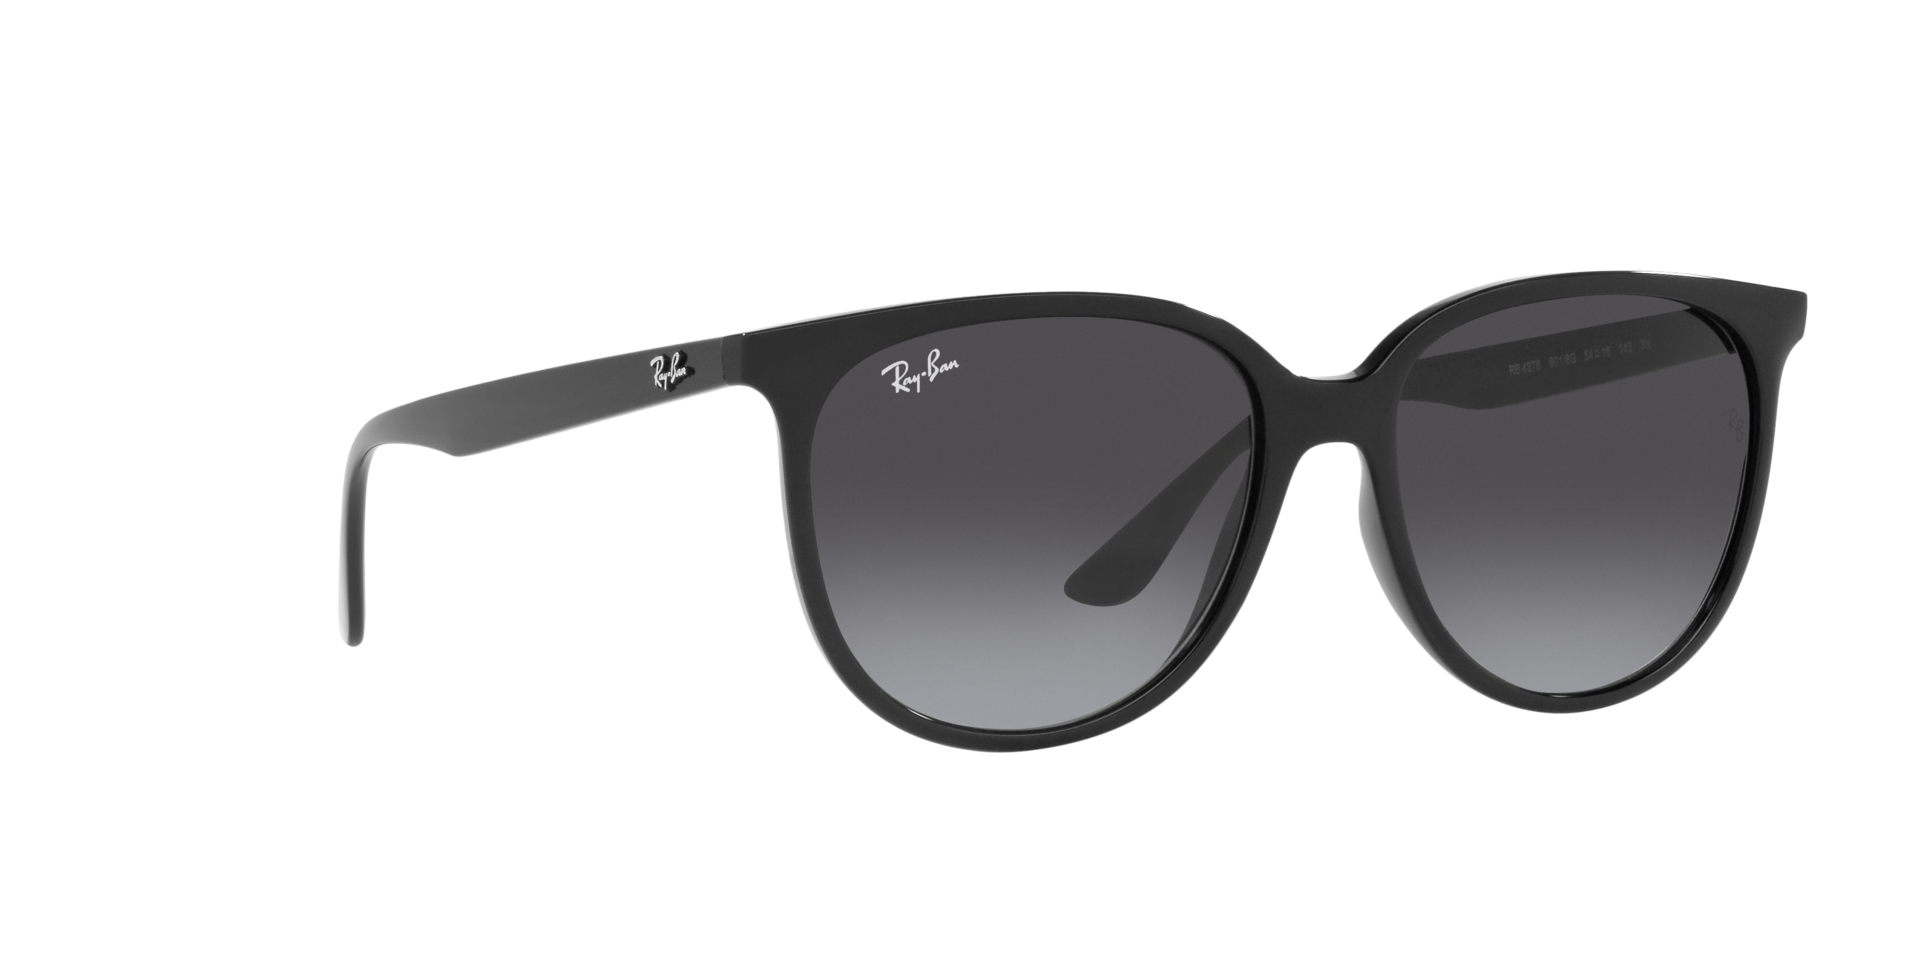 Buy Ray-Ban Rb4378 Sunglasses Online.